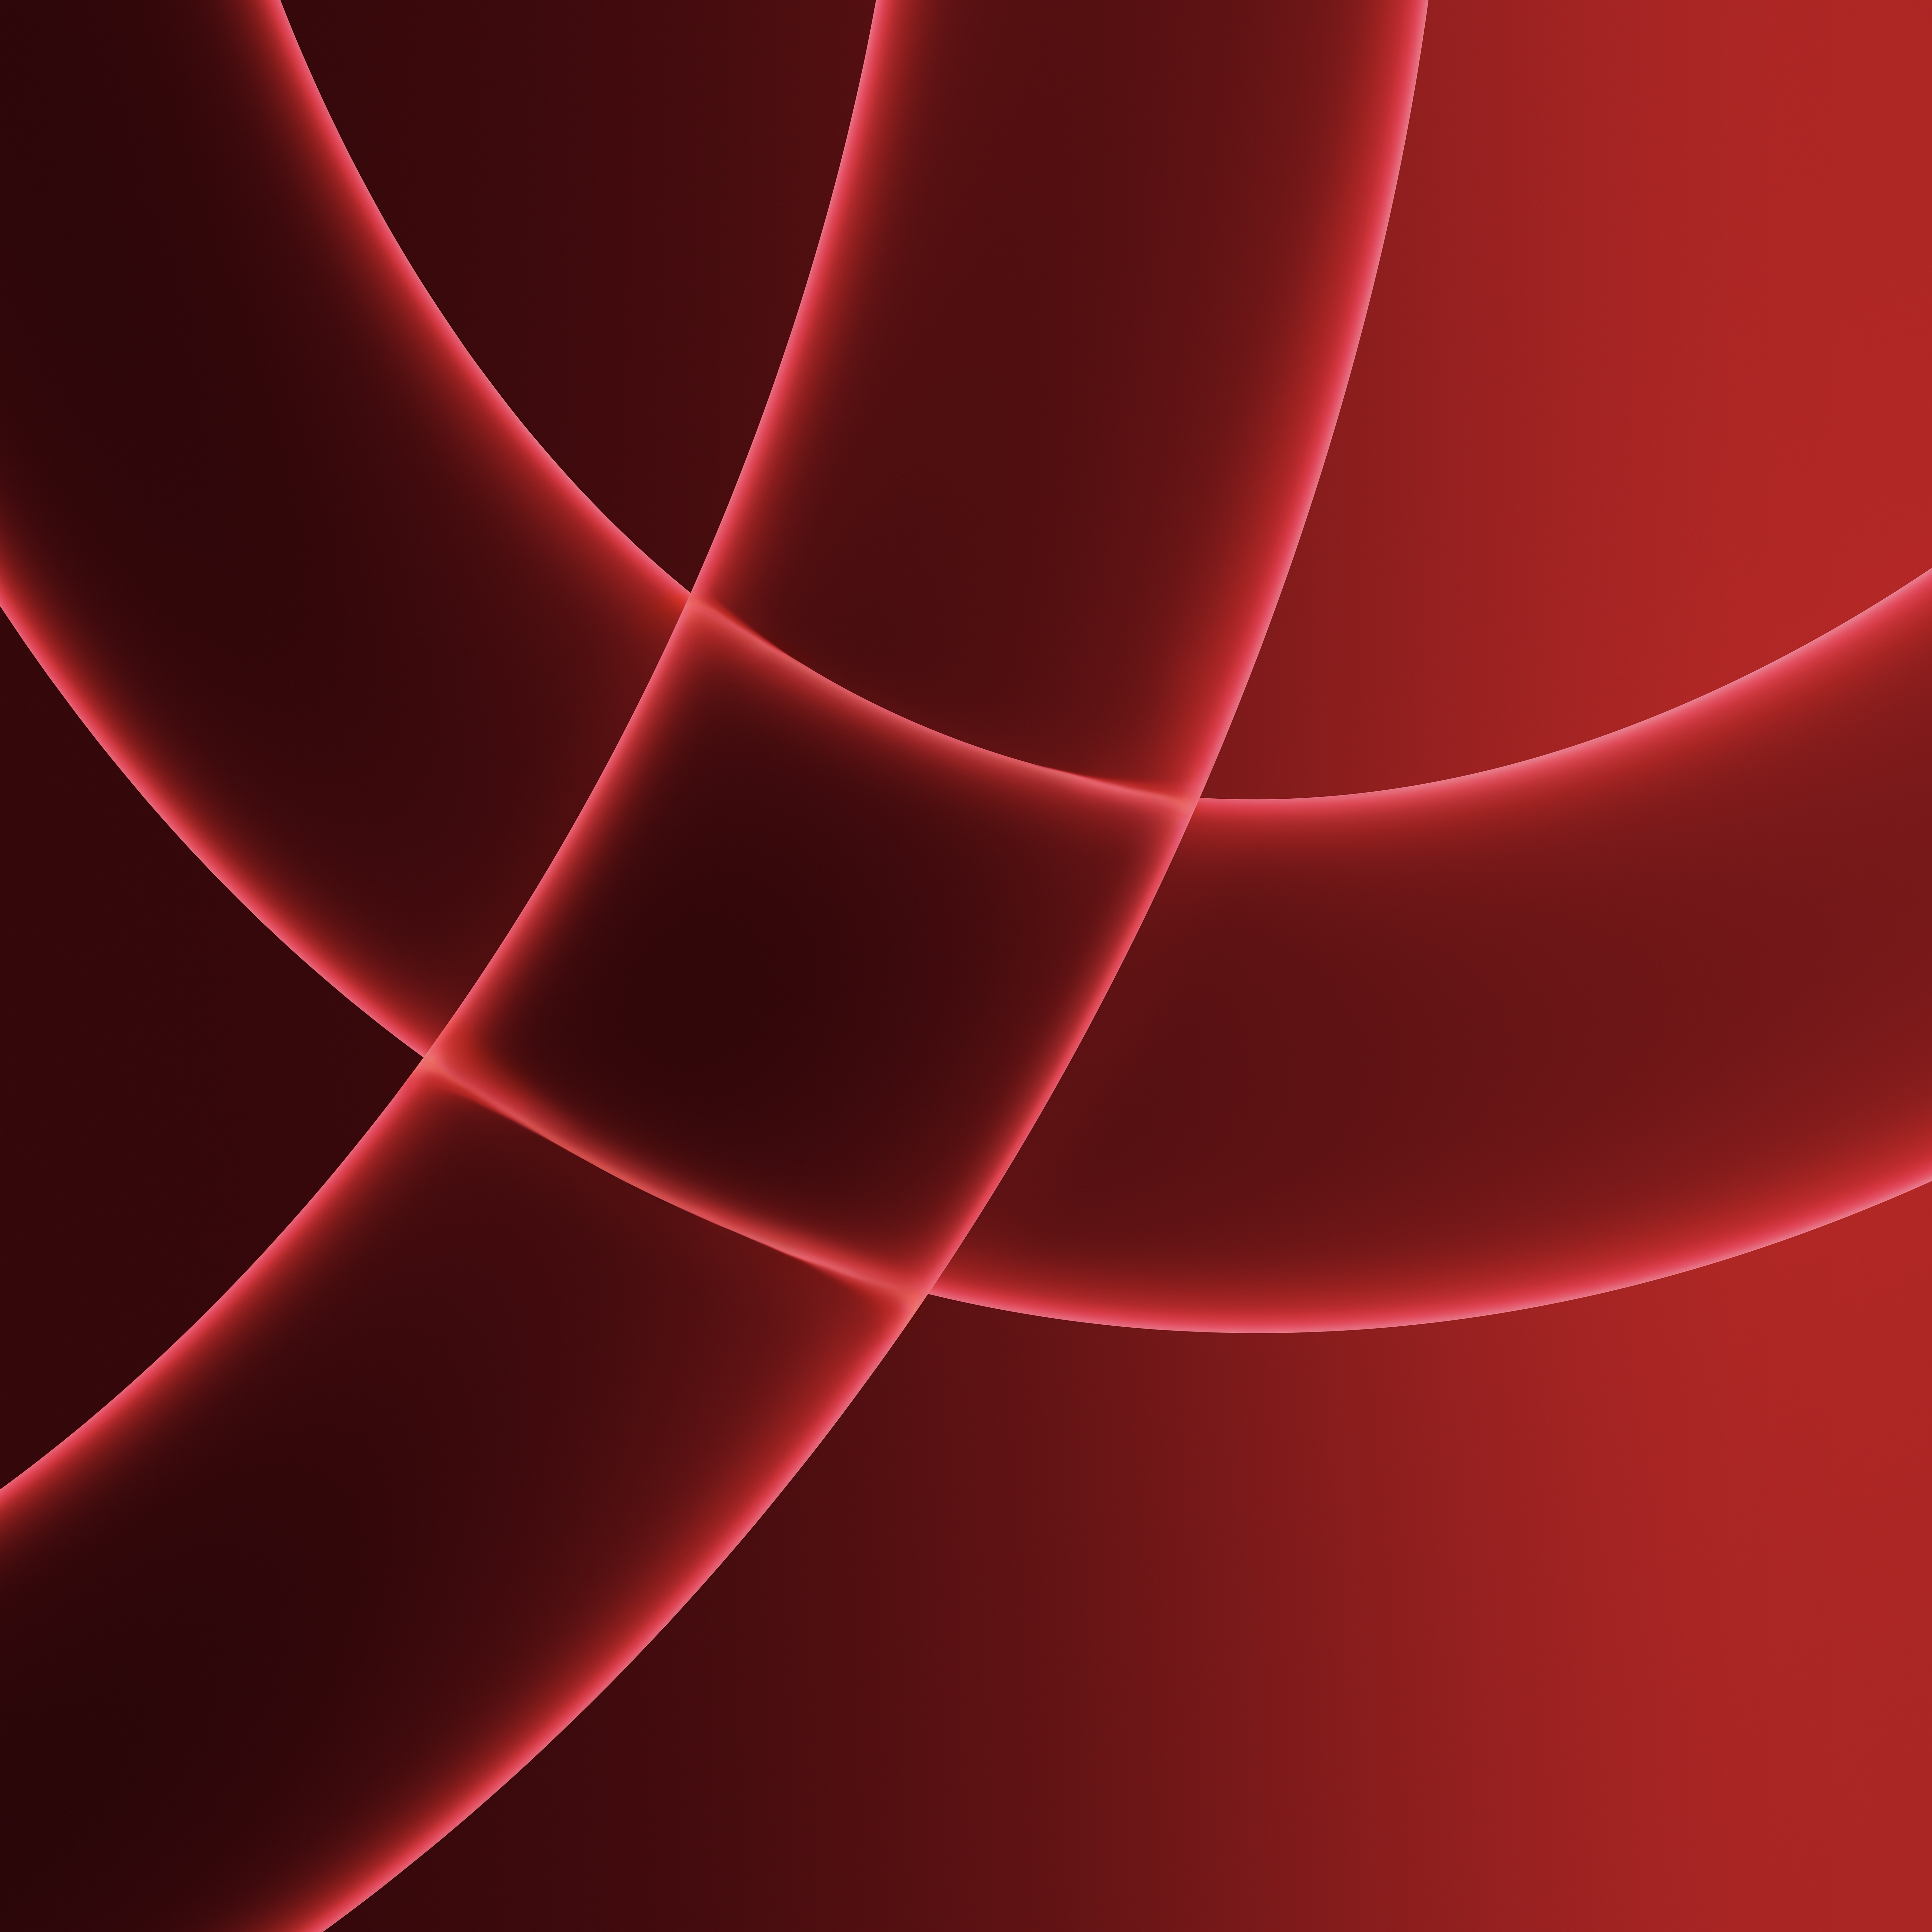 HD wallpaper, Red Background, Stock, Apple Event 2021, Imac 2021, 5K